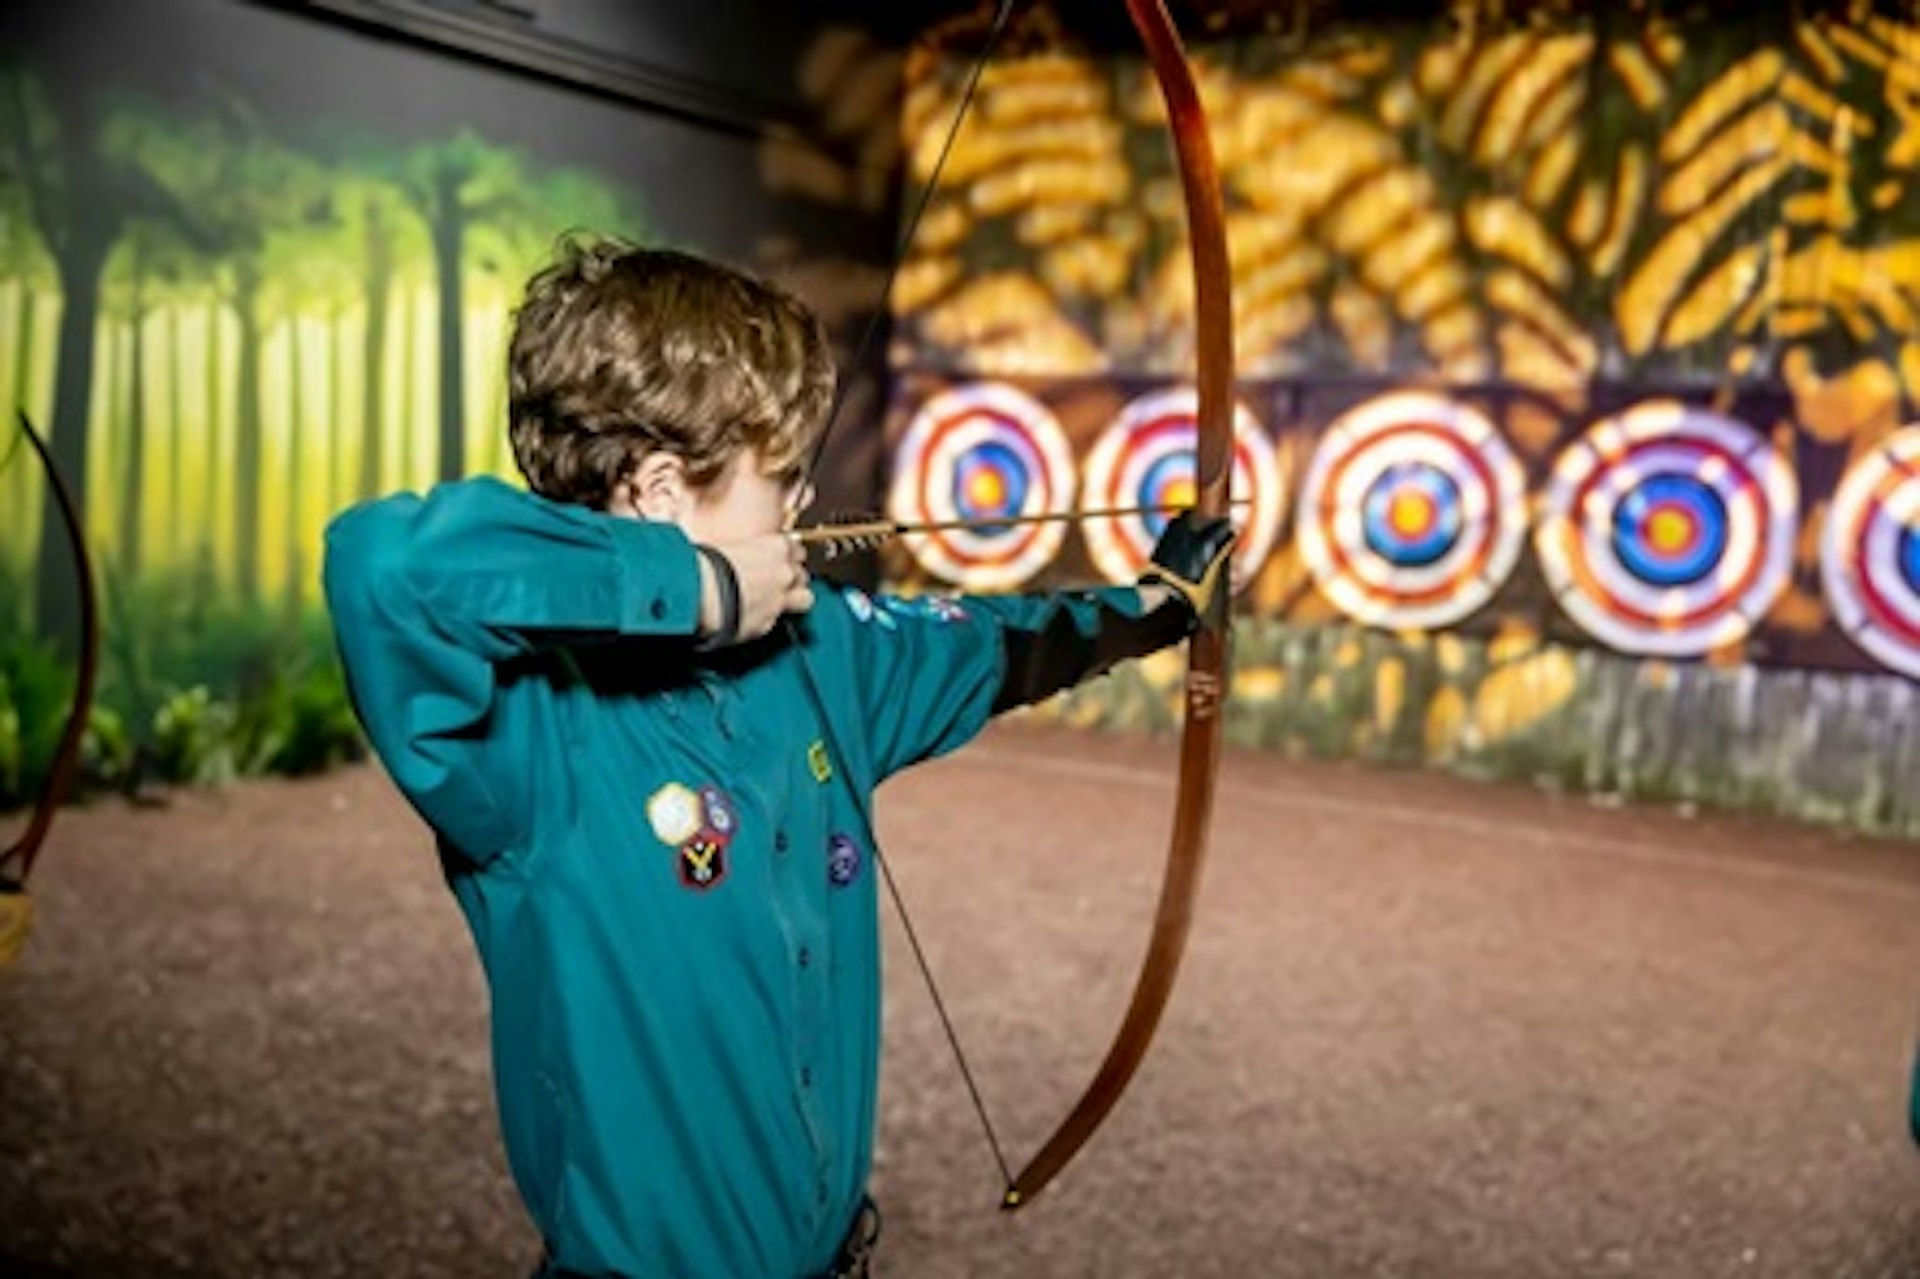 Climbing and Archery Experience for Two at The Bear Grylls Adventure 2